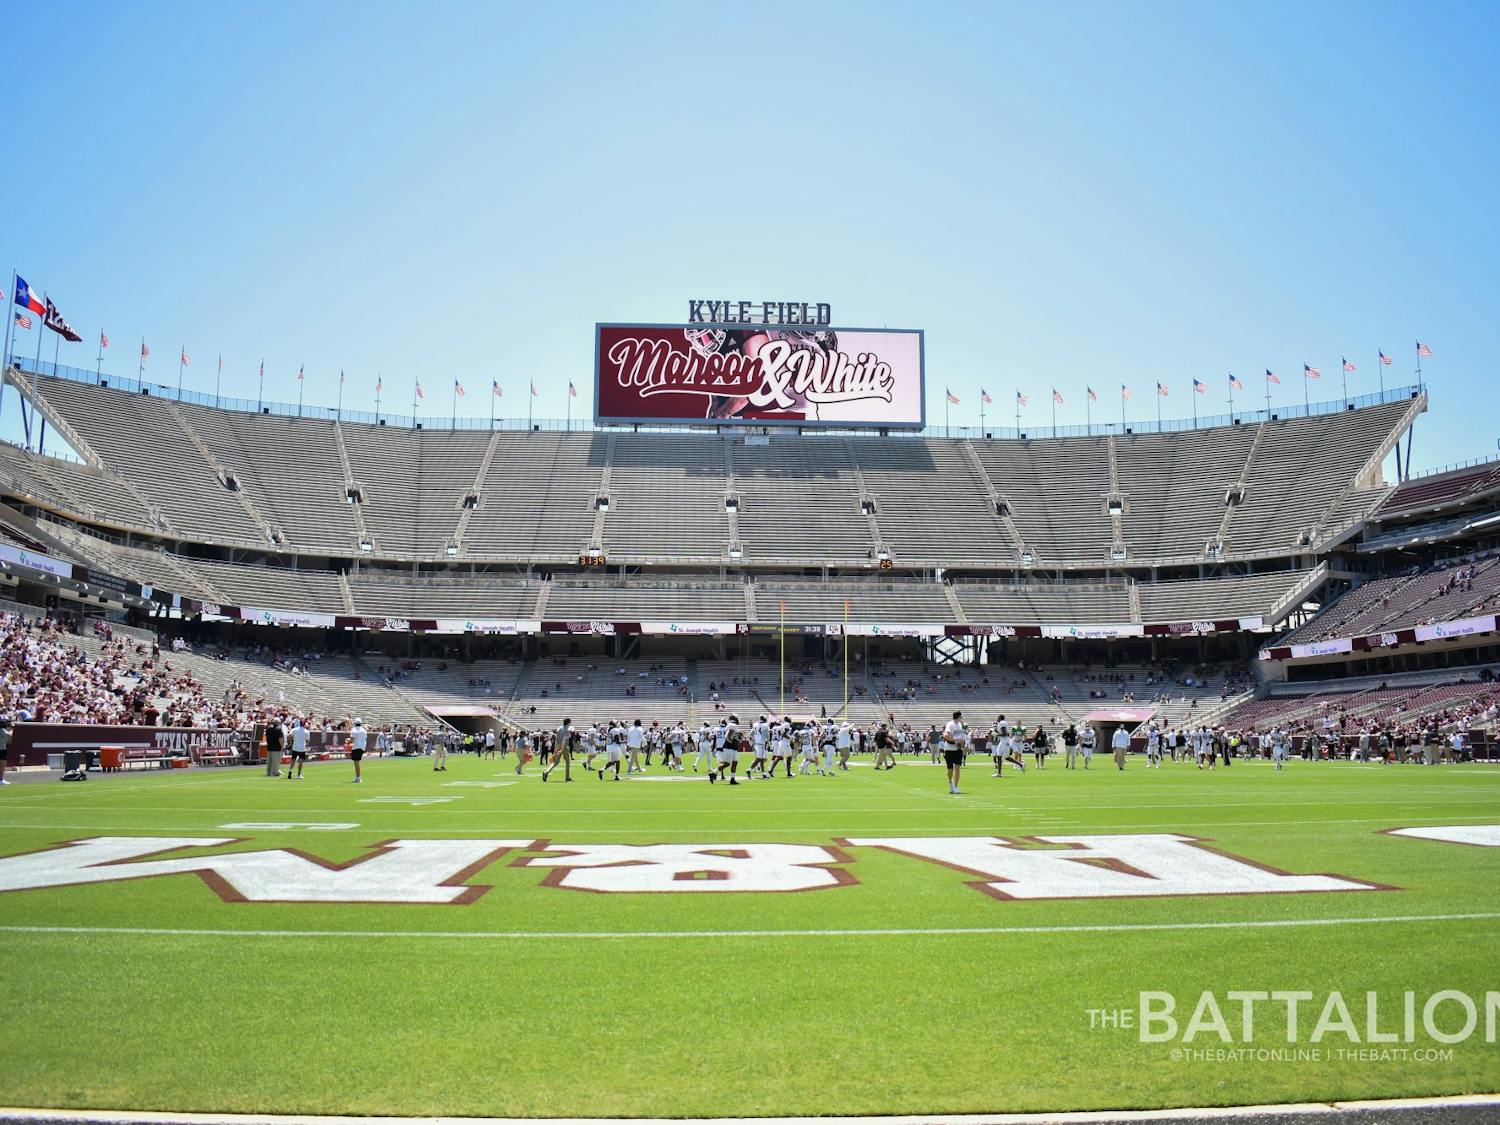 Kyle Field, located on the campus of the Texas A&amp;M University in College Station, Texas, is home to the Texas A&amp;M Aggies football team.